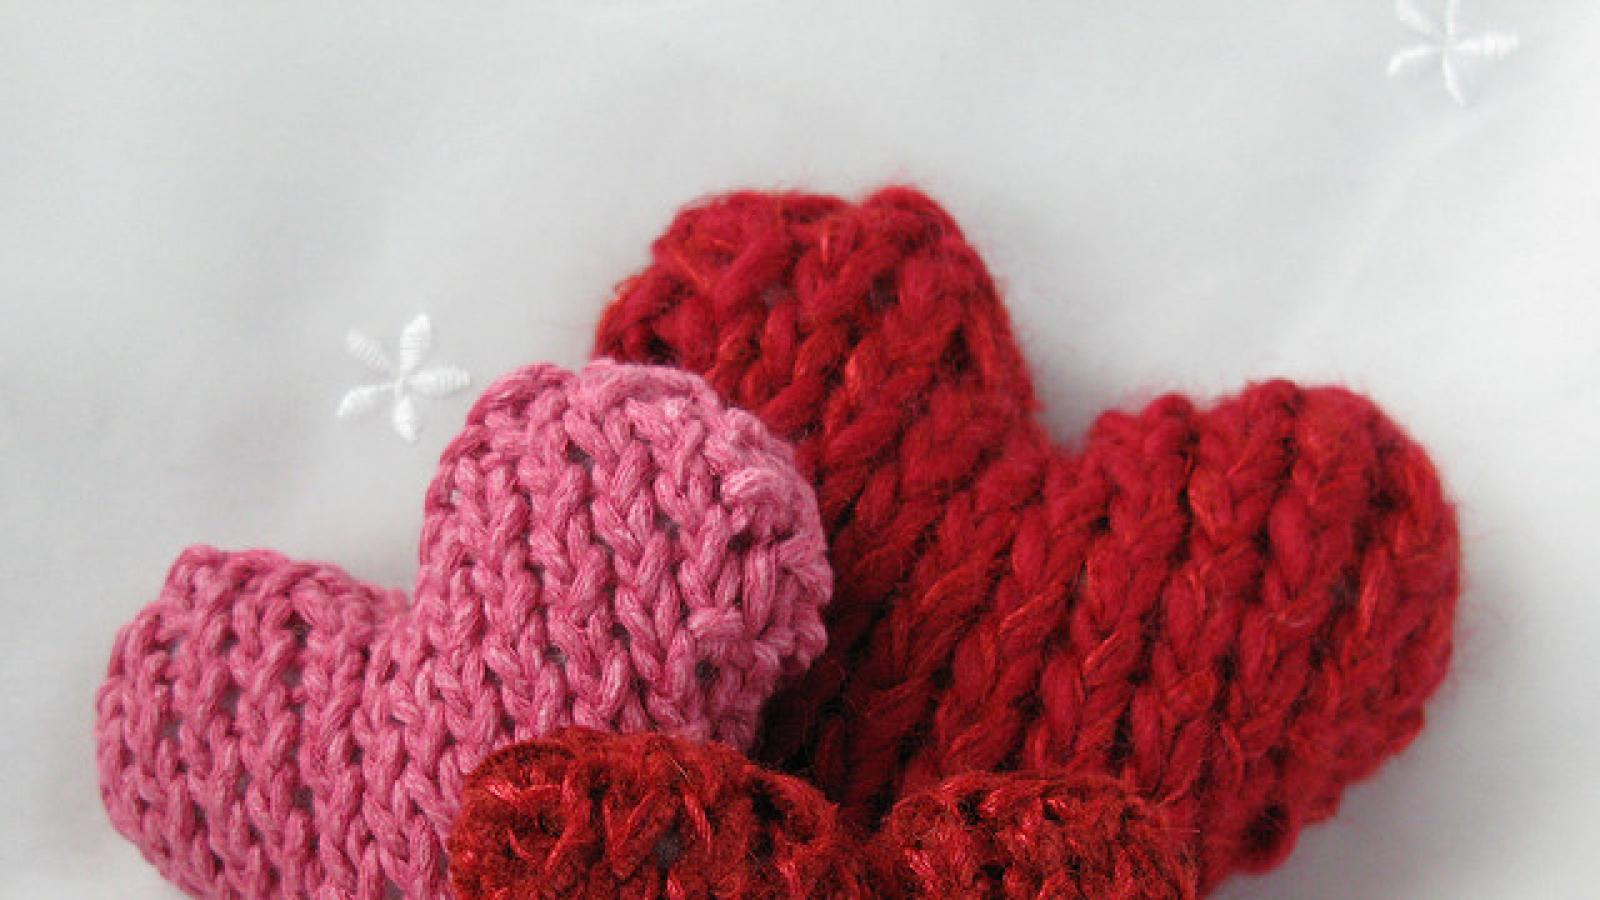 Three knitted hearts